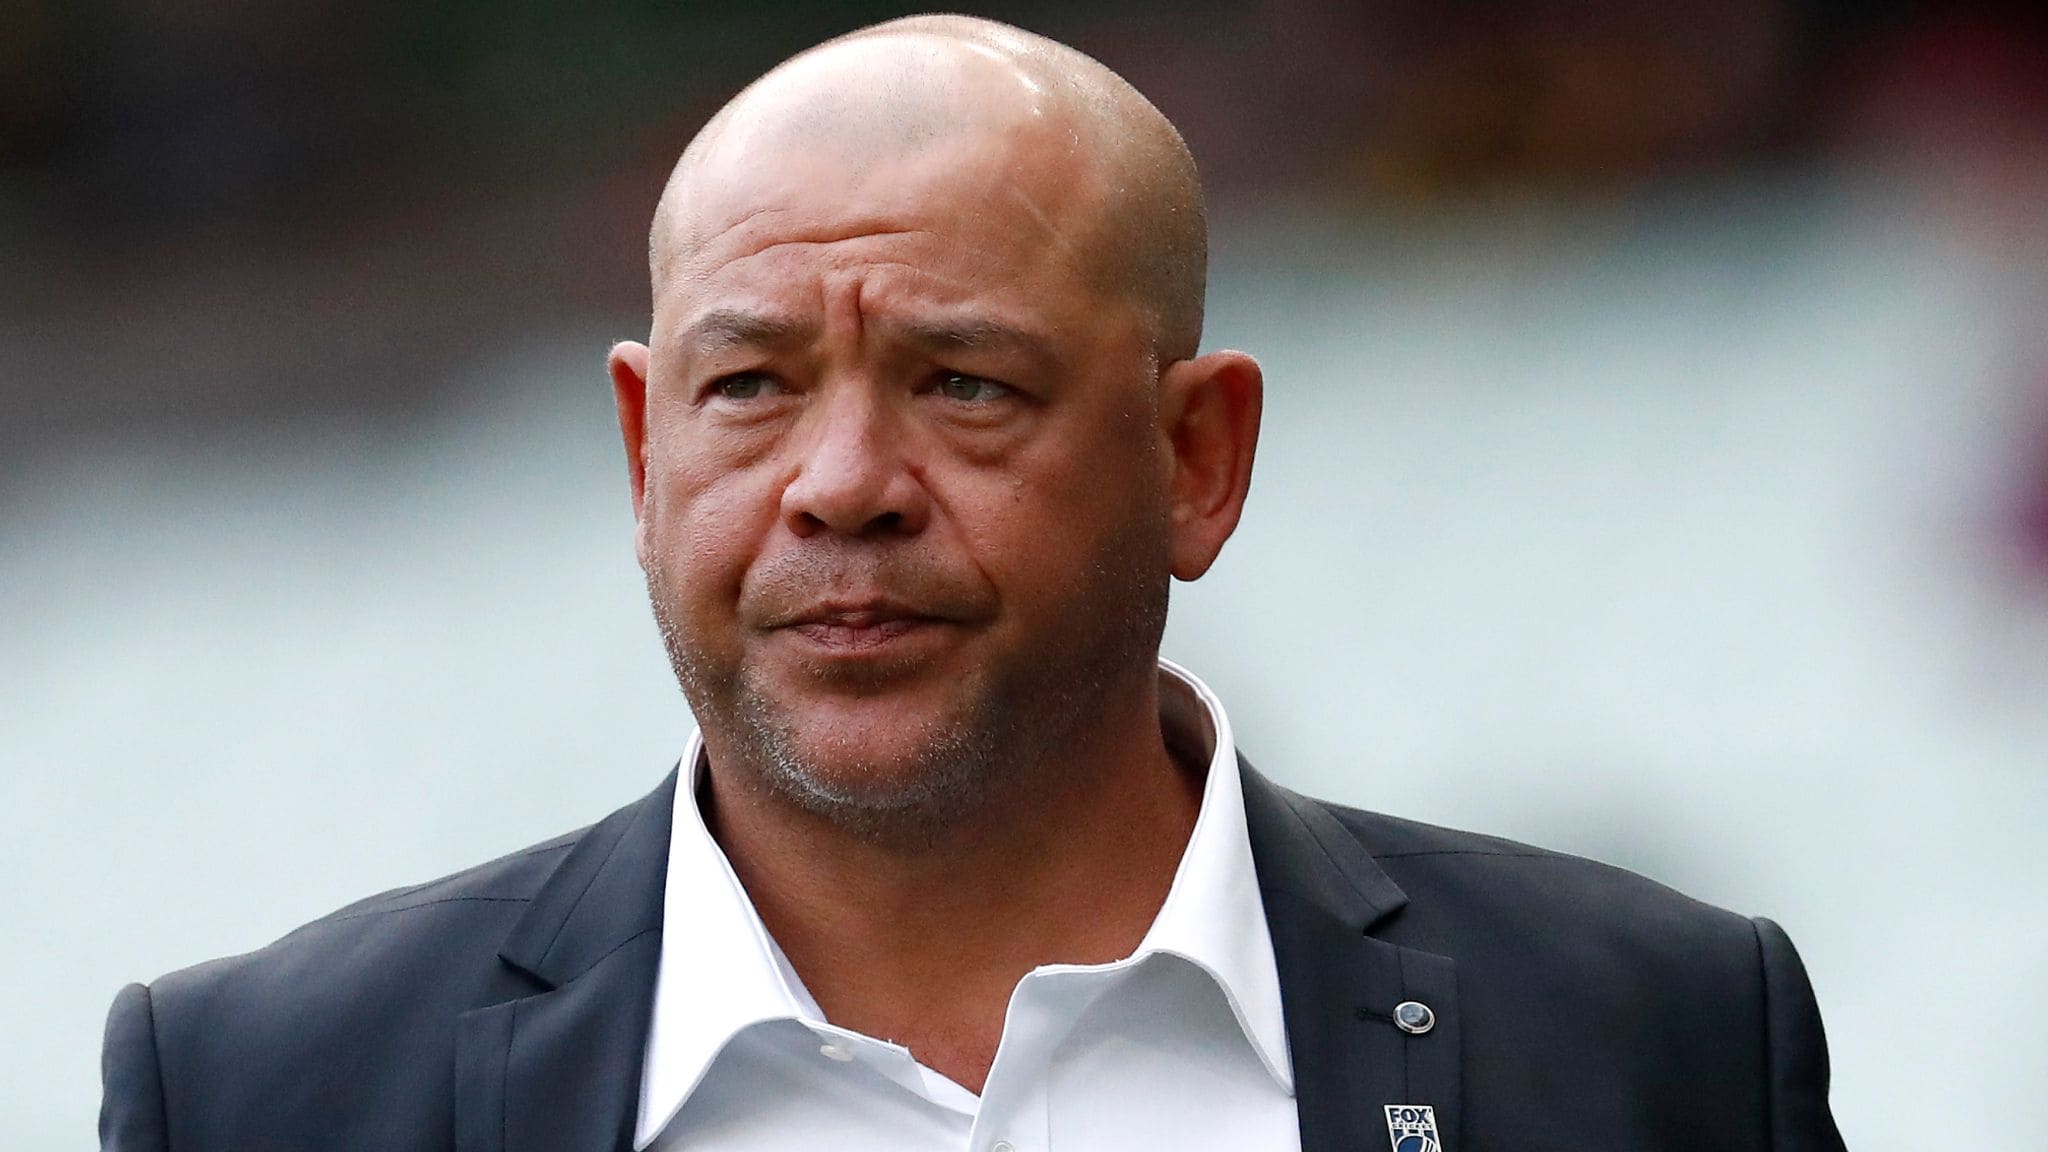 Andrew Symonds Age, Height, Wife, Family - Biographyprofiles